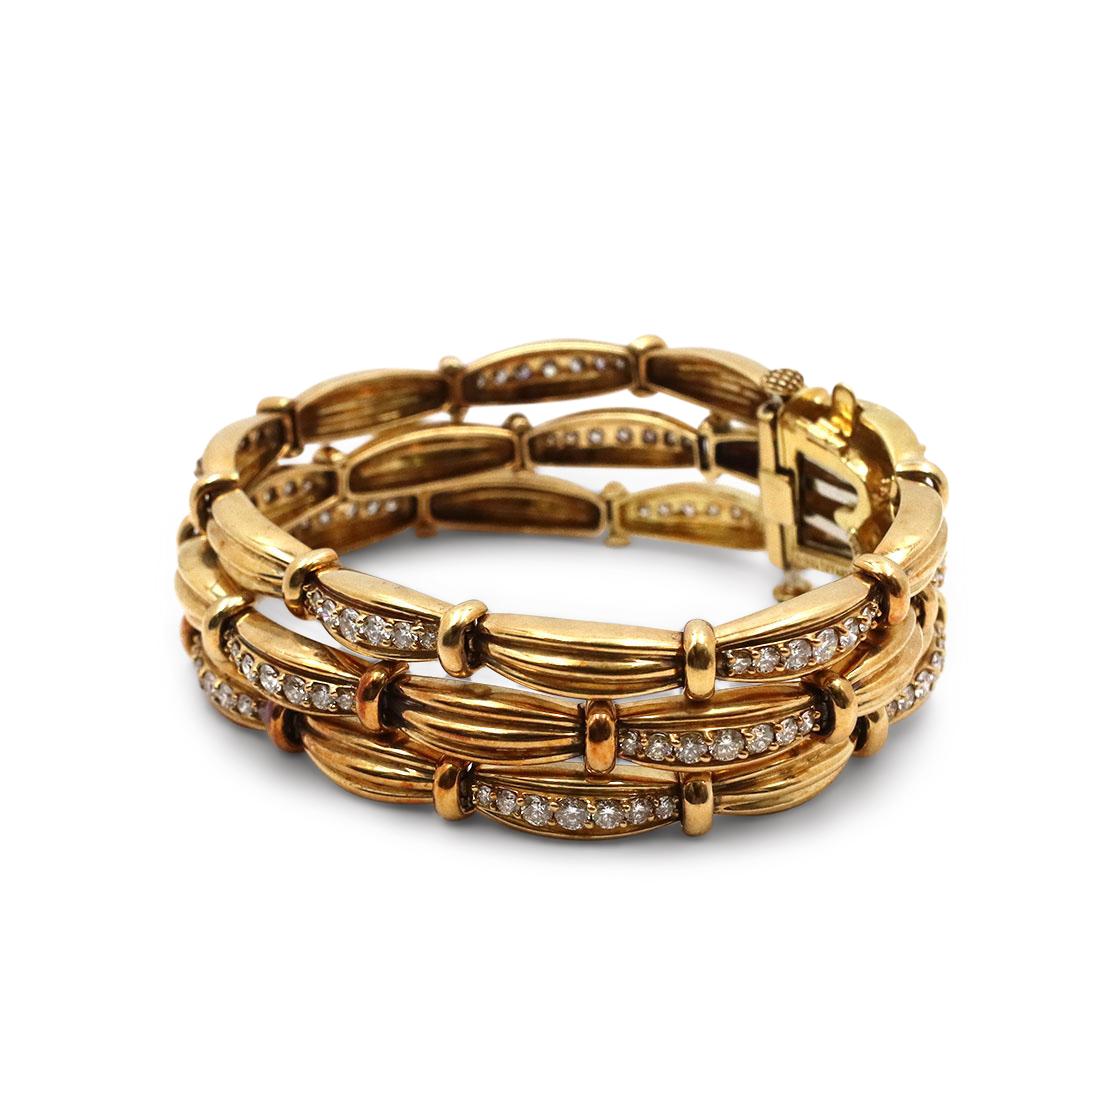 Authentic classic 3-row bracelet from the 'Tiffany Signature Series' crafted in 18 karat yellow gold. Designed in the form of alternating reeded links set with round brilliant cut diamonds (E-F color, VS clarity) for an estimated 5 carats total